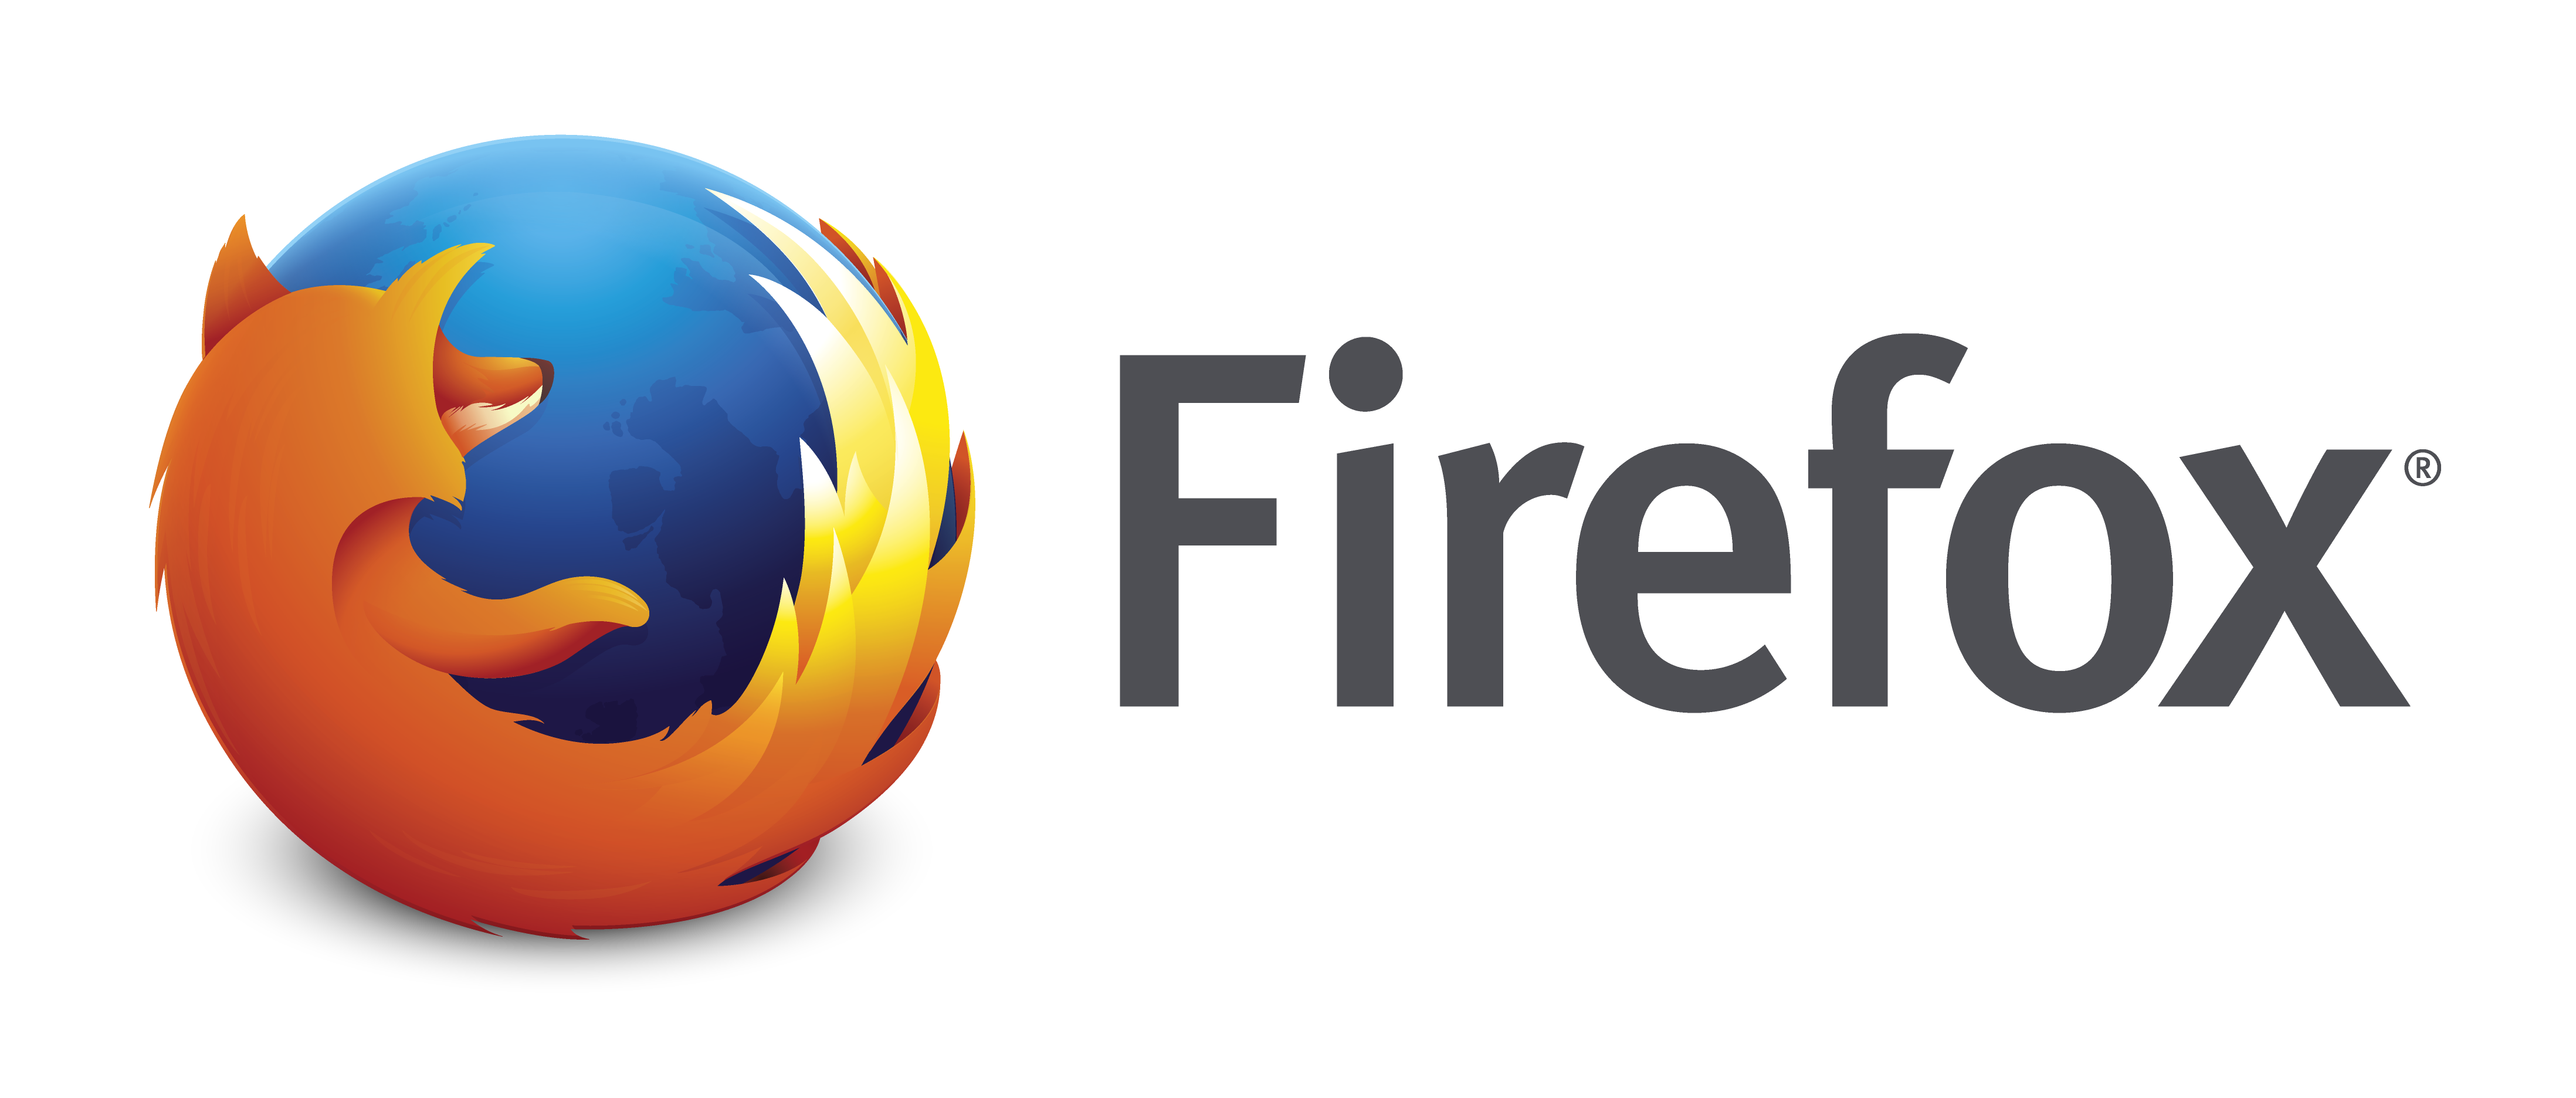 Firefox Mozilla Apologizes For Coverage Of Gamergate | The Mary Sue